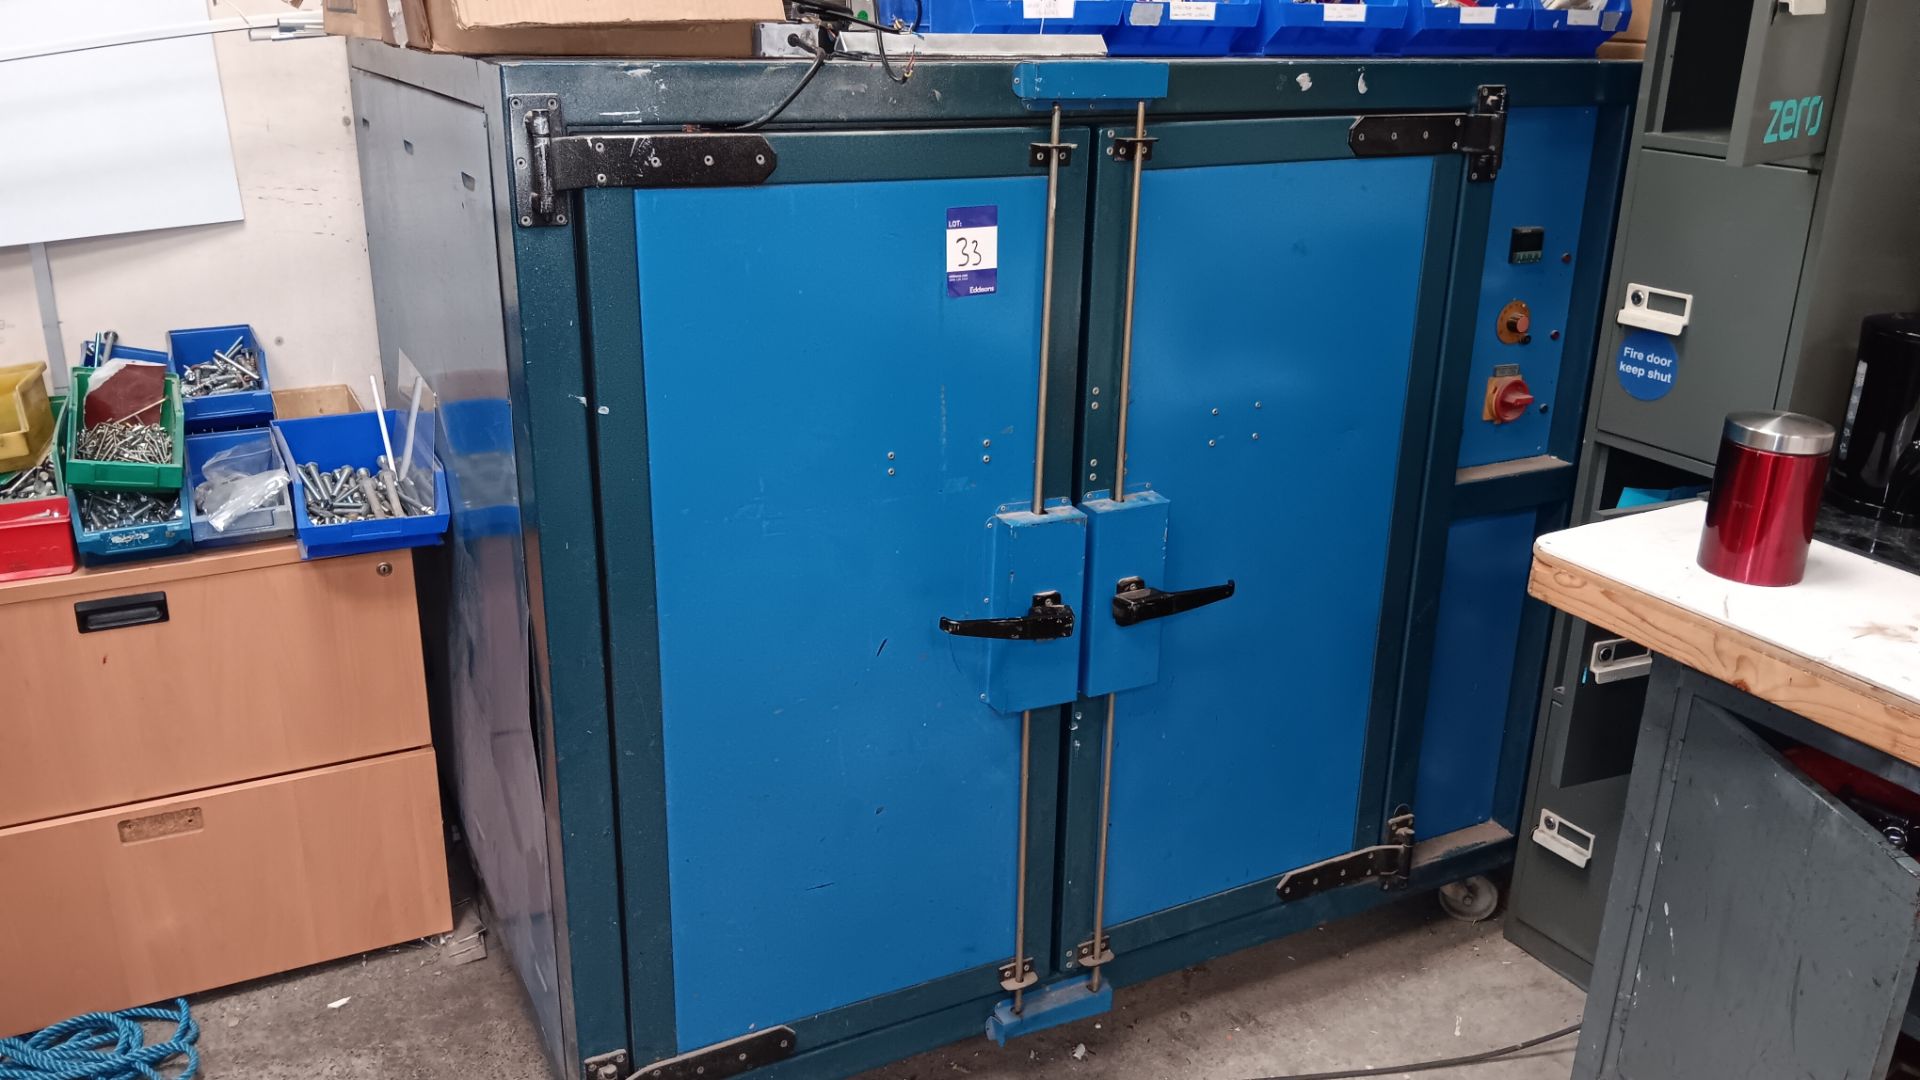 Unbadged VLCO/SPEC65 oven for acrylic and plastic sheet forming, 415v, serial number 972208 –